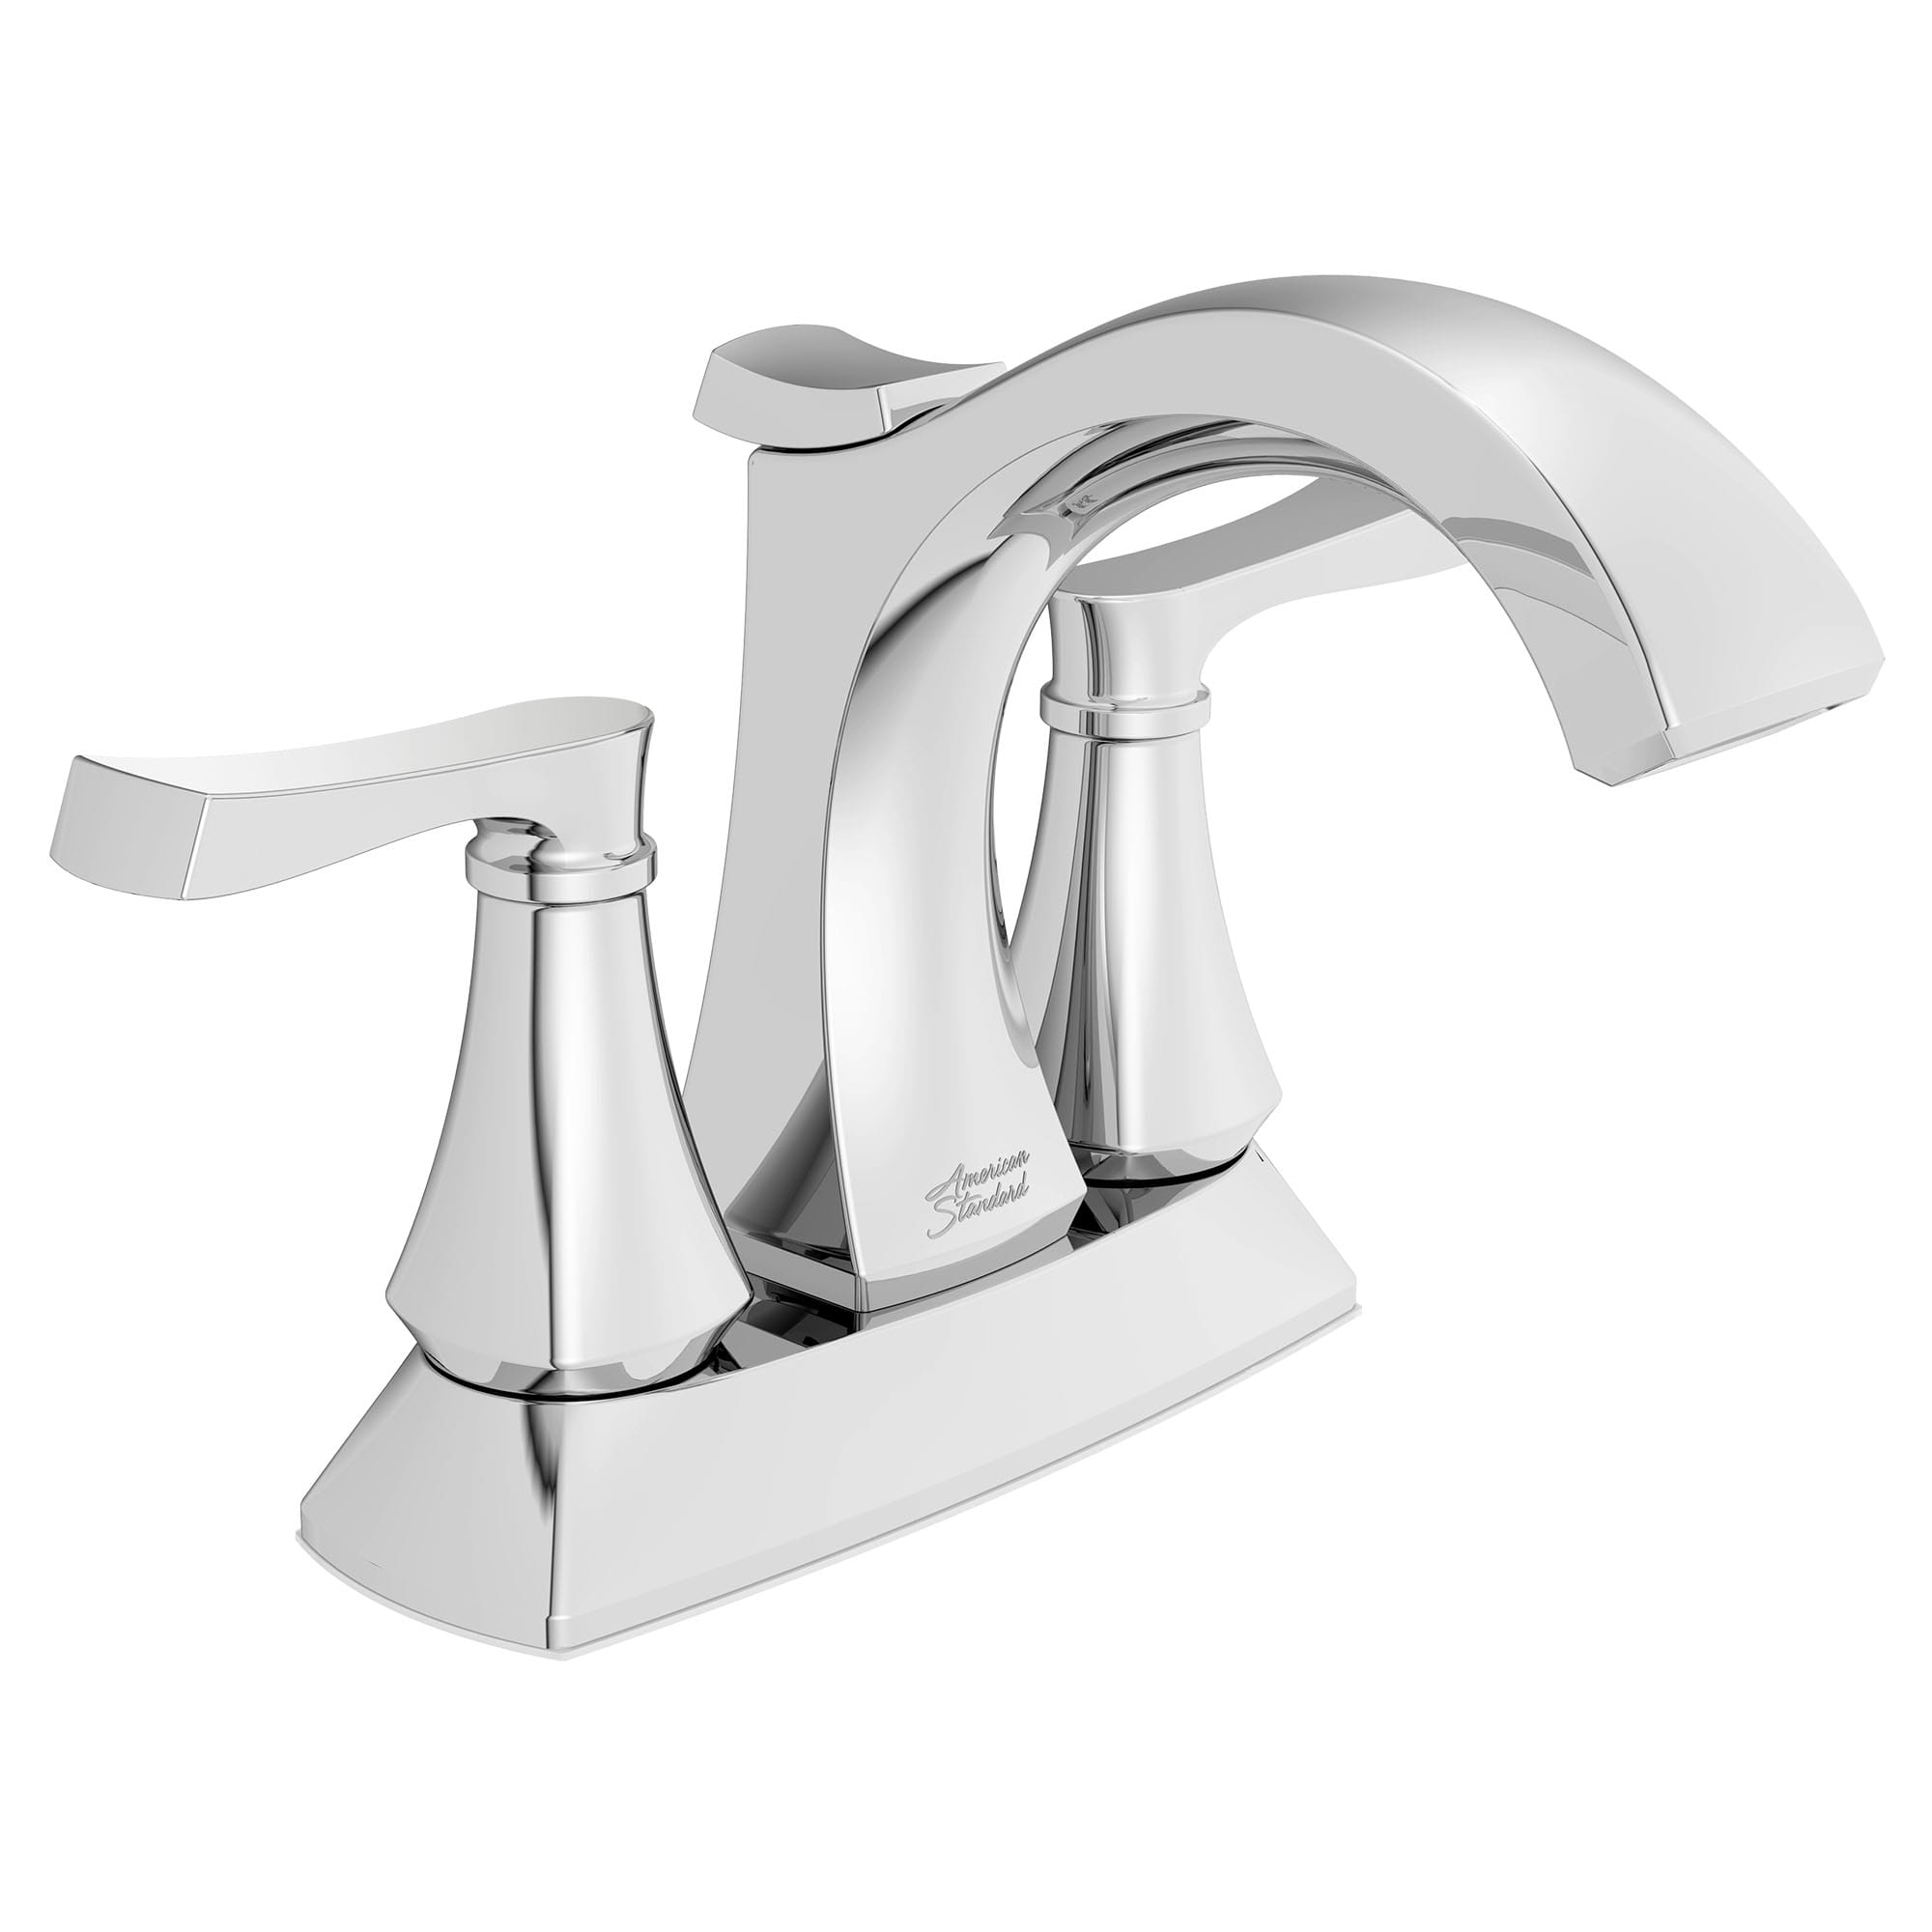 Kaleta 4 In Centerset 2 Handle Bathroom Faucet 15 GPM with Lever Handles CHROME